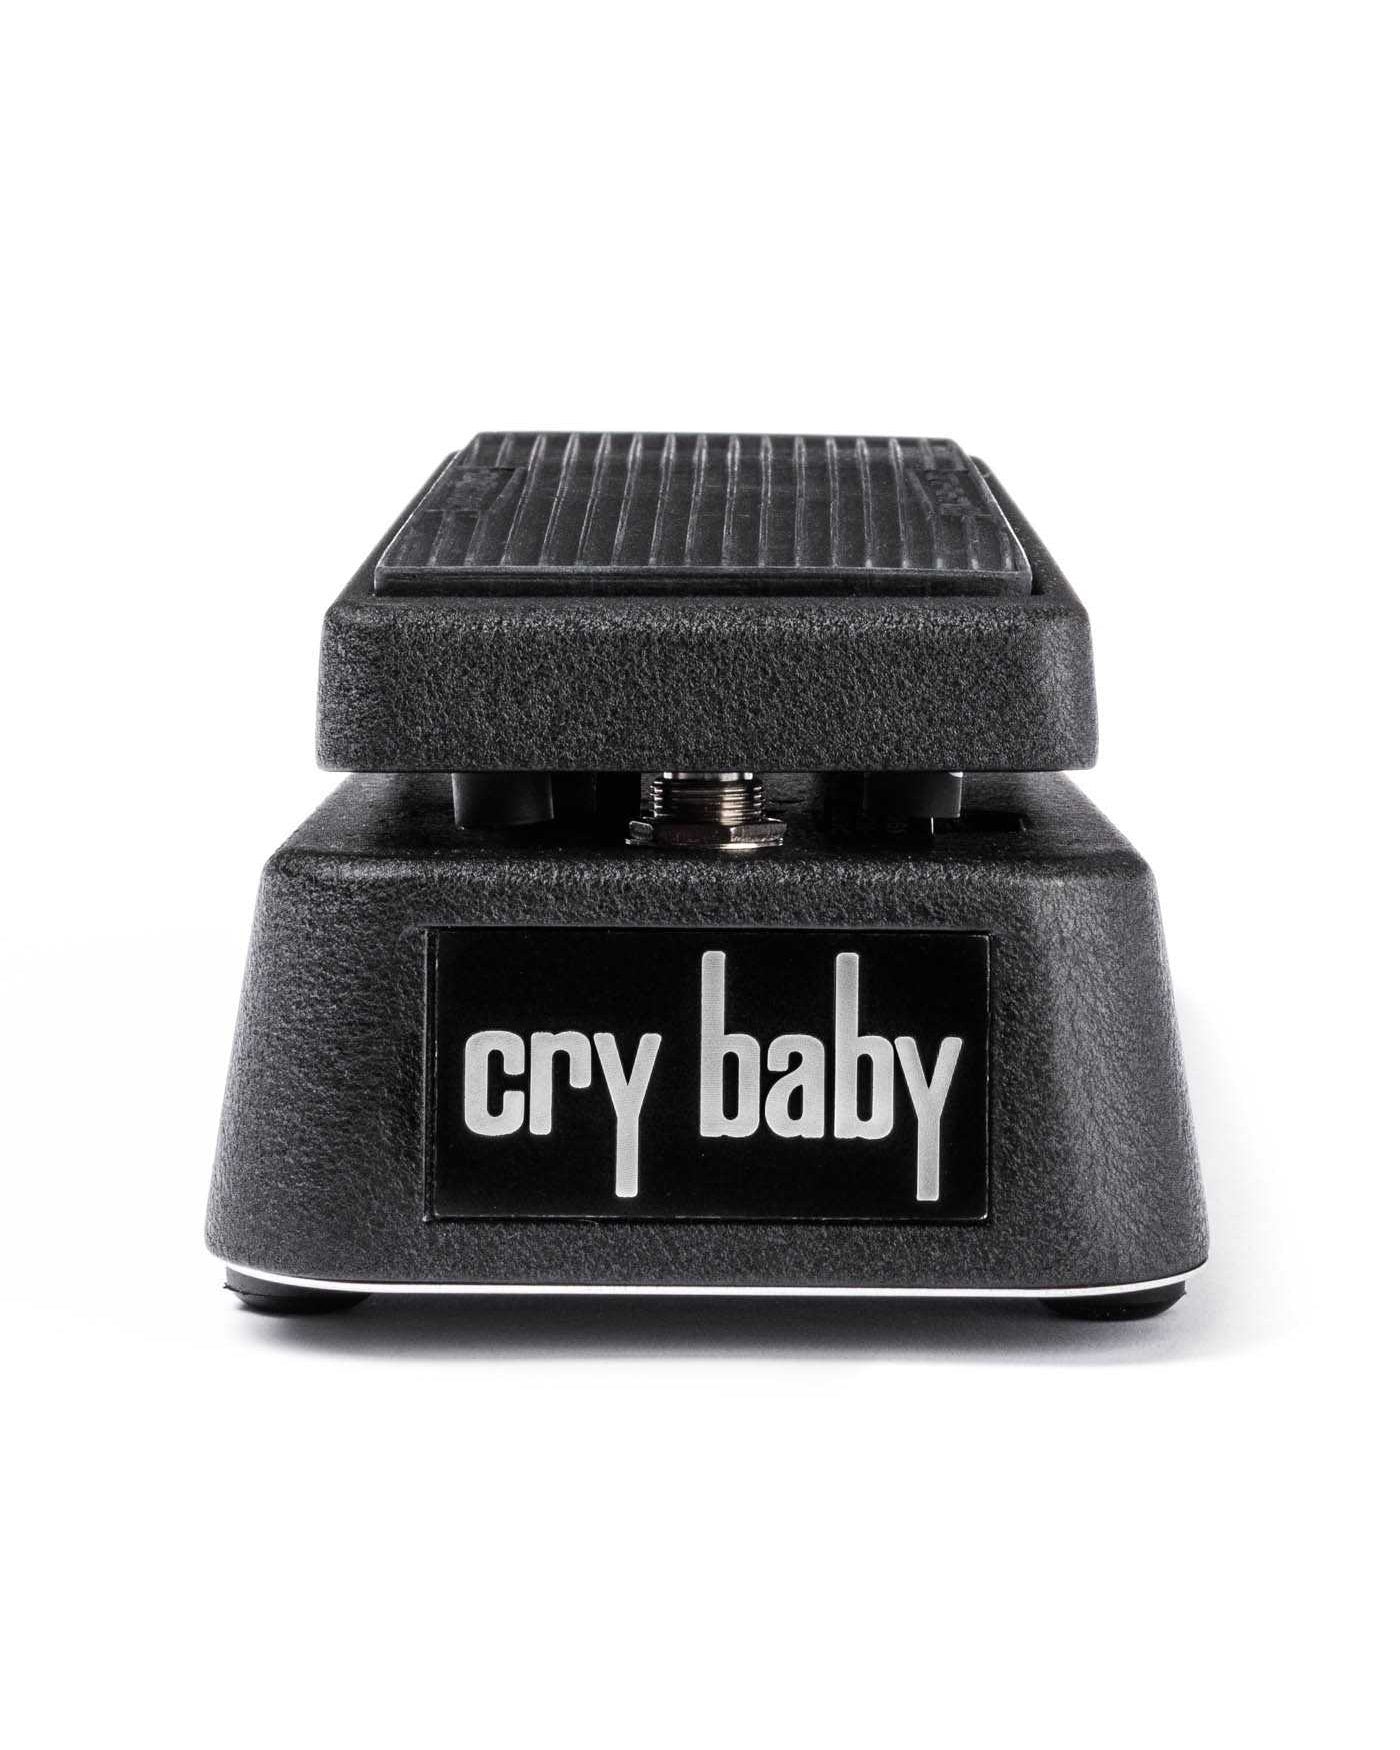 Back of Dunlop GCB95 Cry Baby Wah Pedal